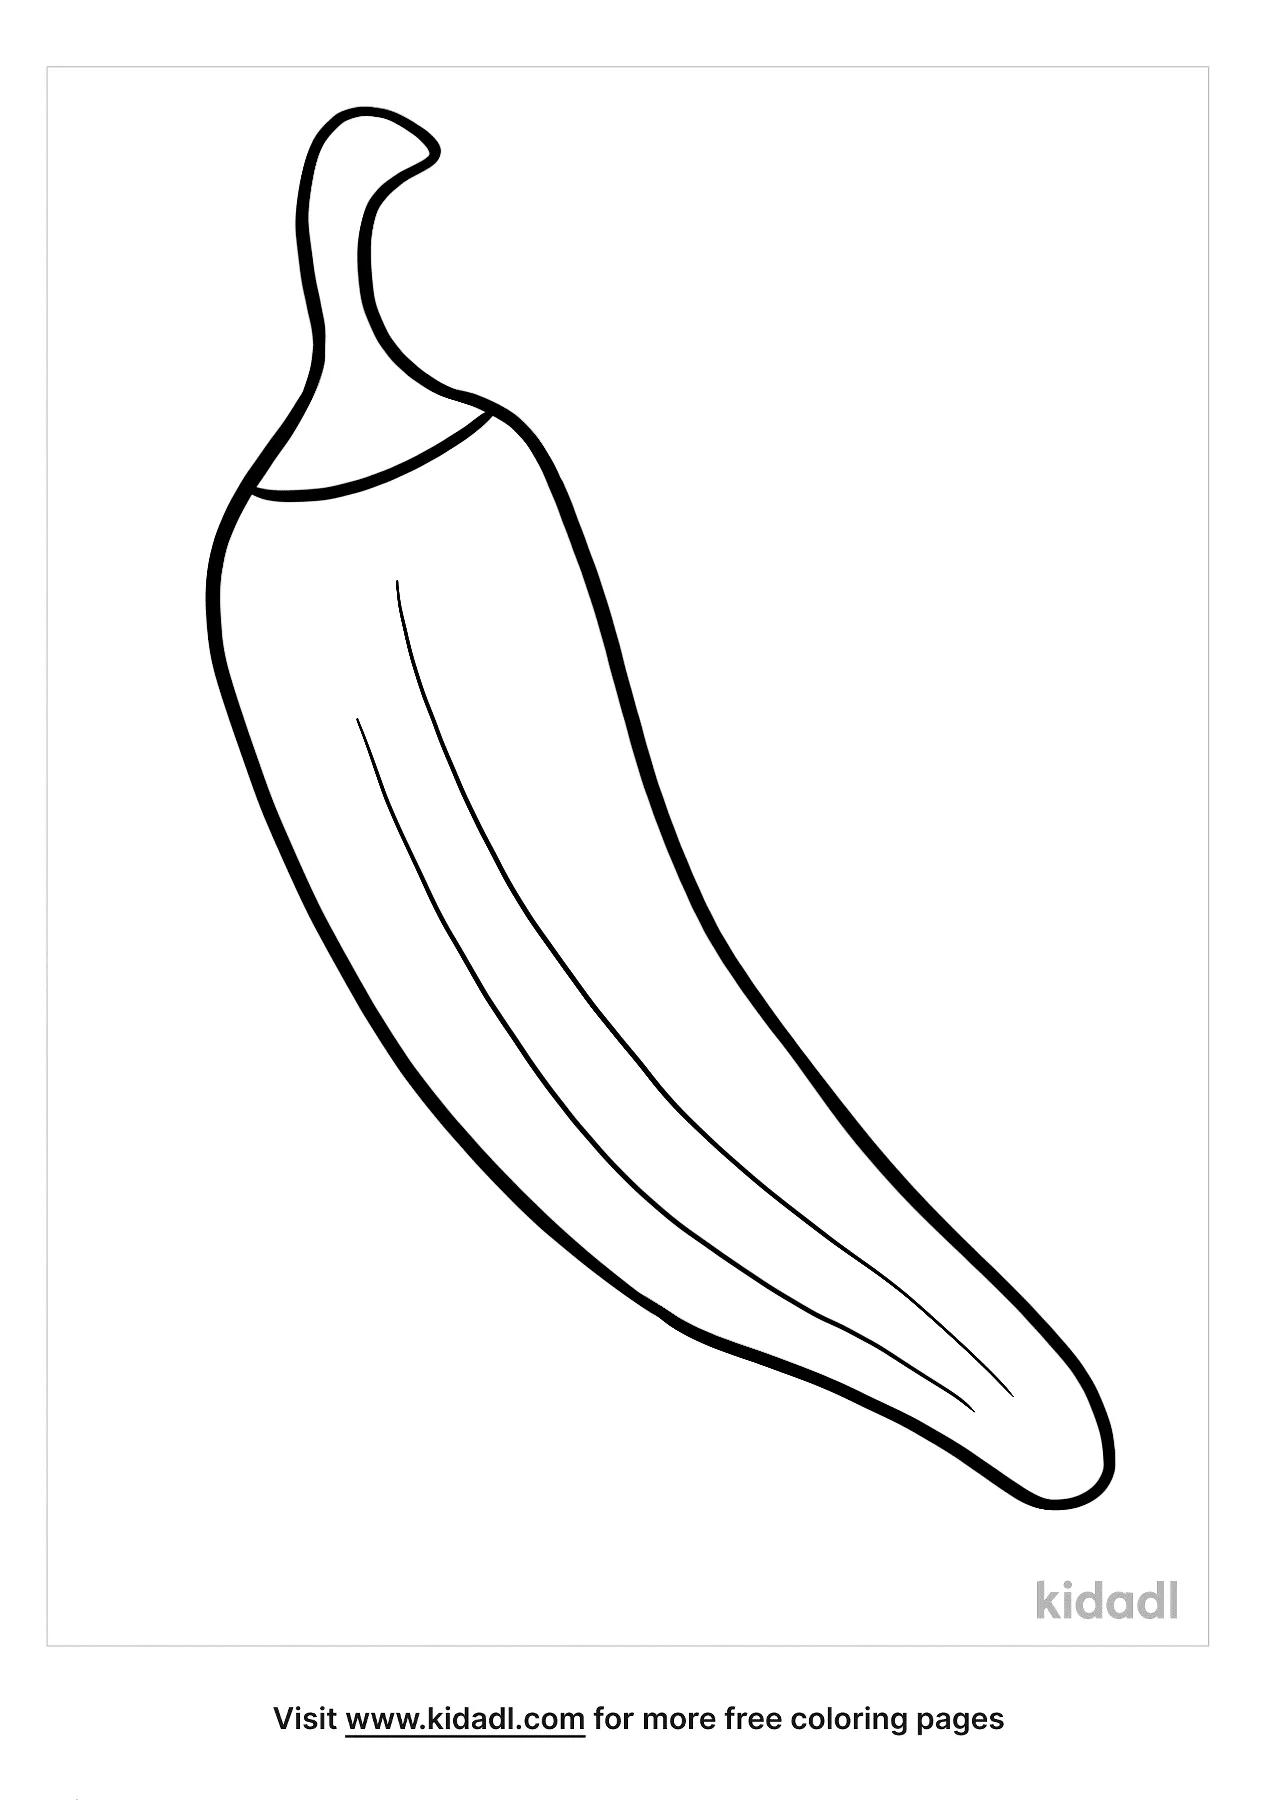 coloring pages pepper